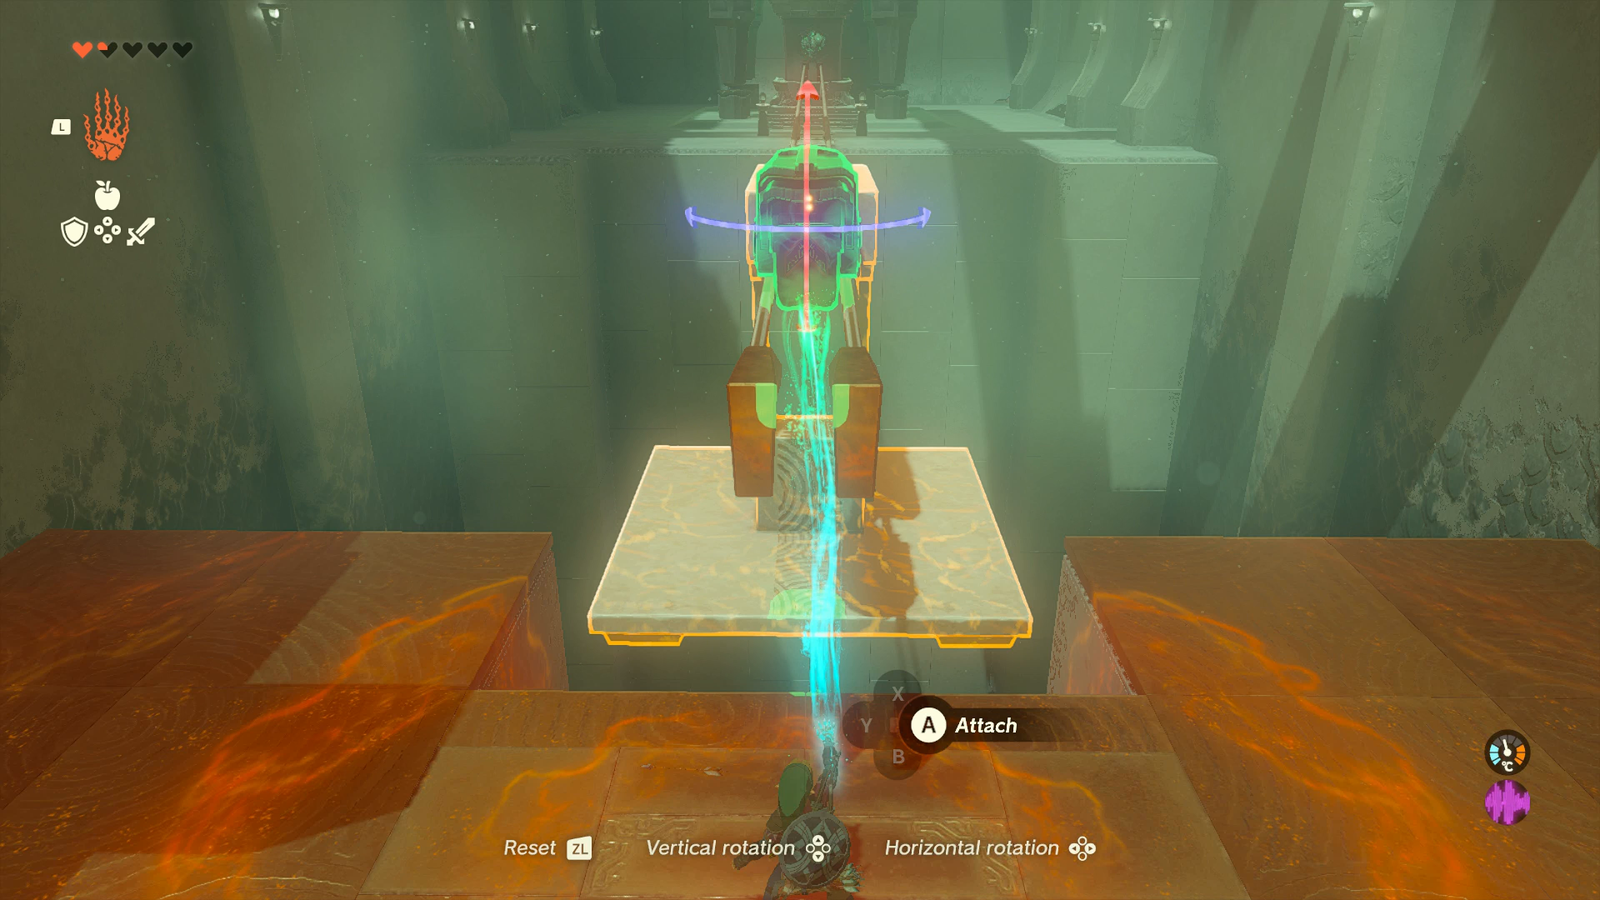 The Legend of Zelda: Breath of the Wild - All Shrines (Locations, Solutions  & All Chests) 